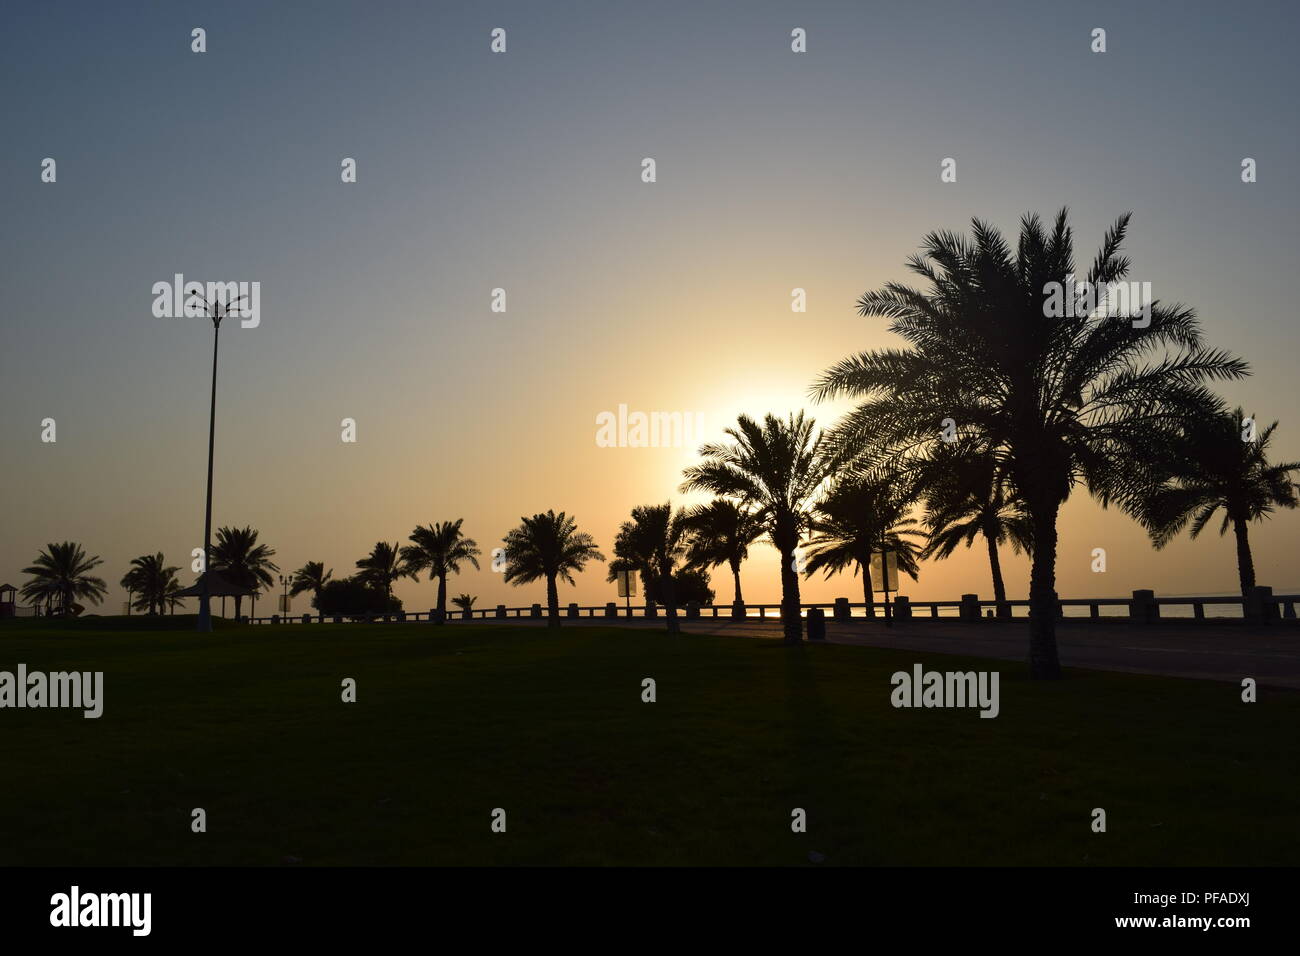 Palm Trees silhouetted against against a dusk sky during sunset in the City of Dammam Stock Photo